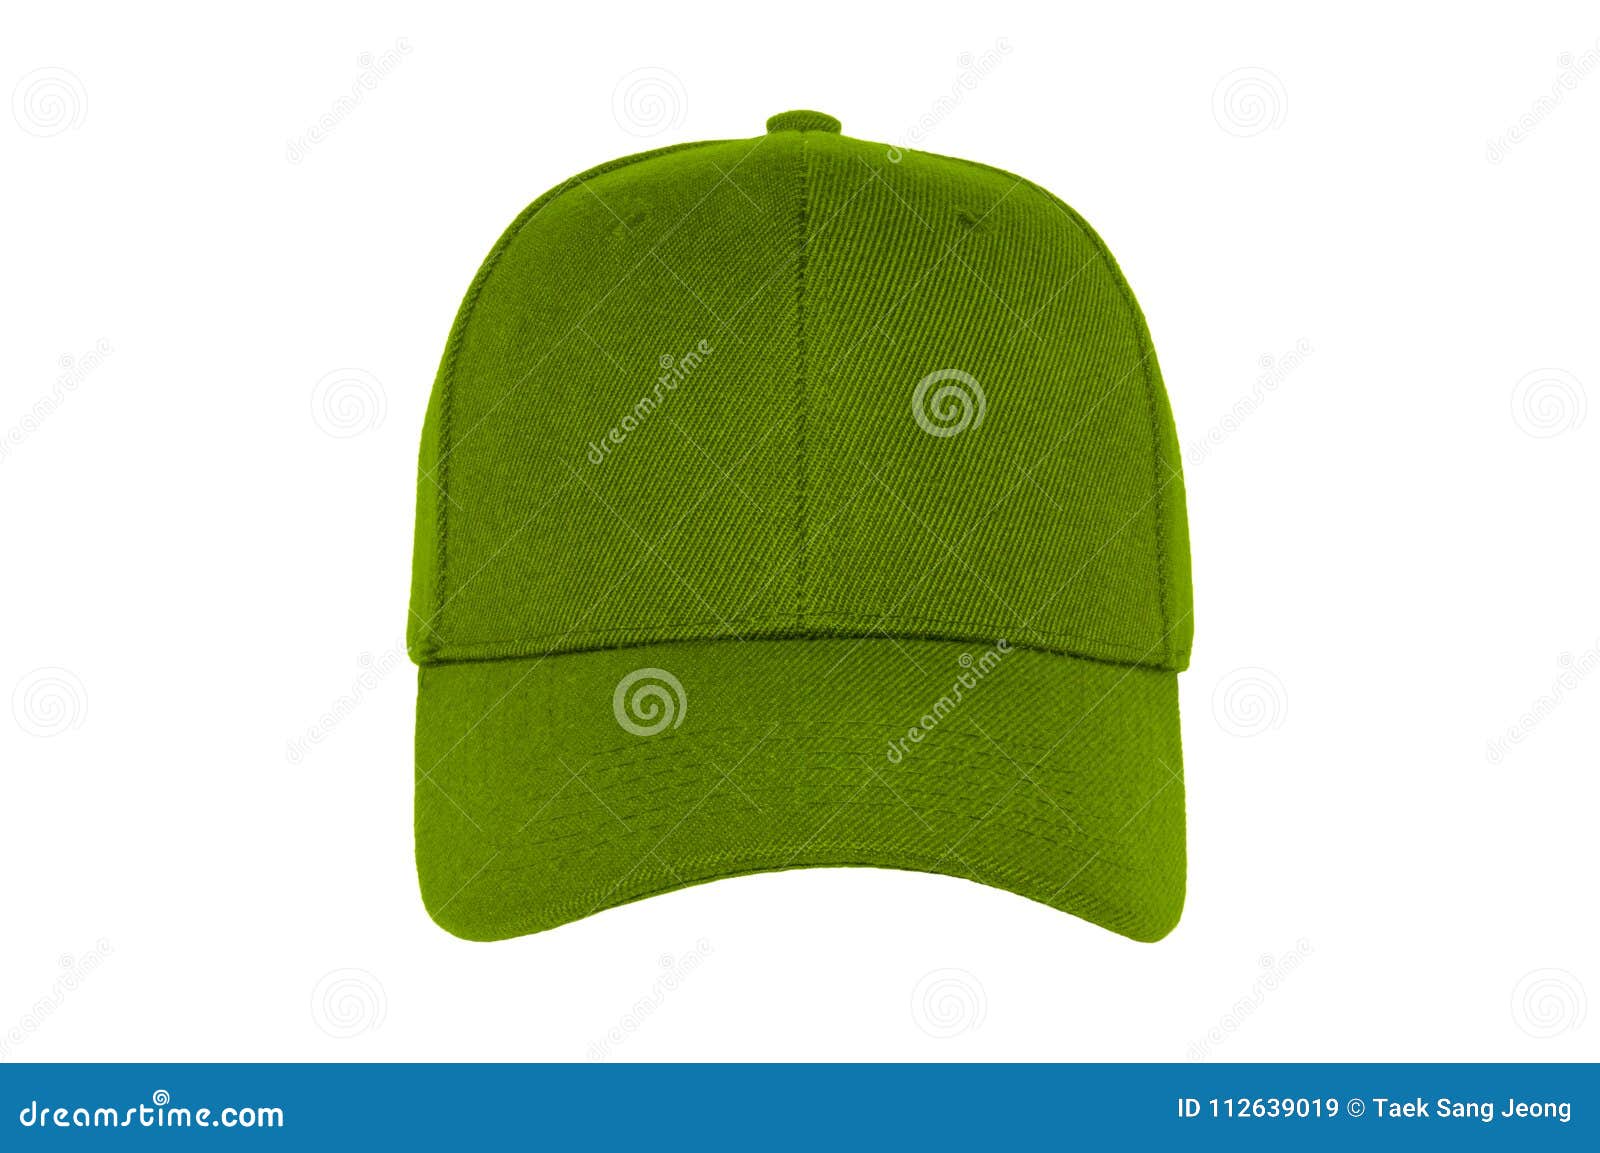 Baseball Cap Color Green Close-up of Front View Stock Image - Image of ...